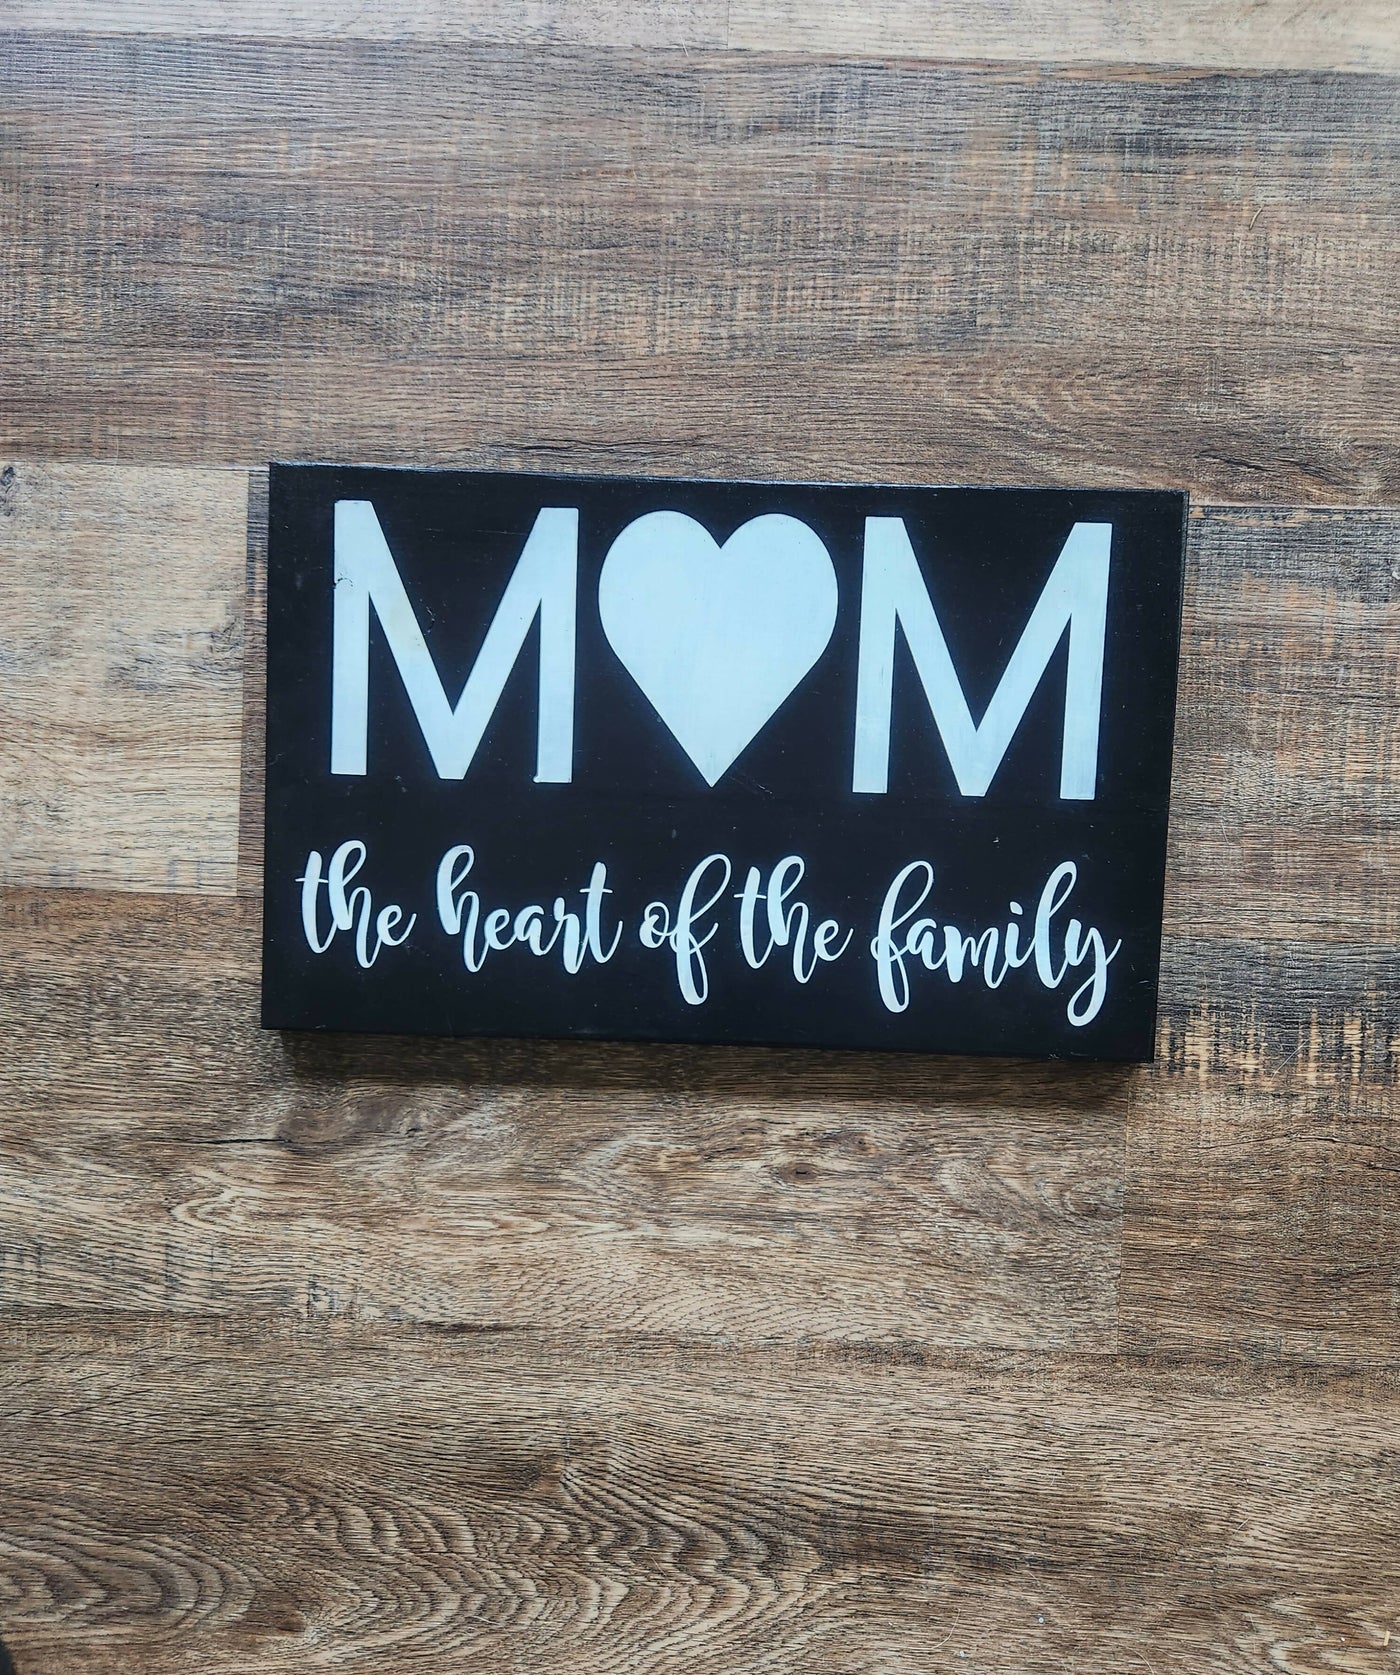 Mom is the heart of the family sign